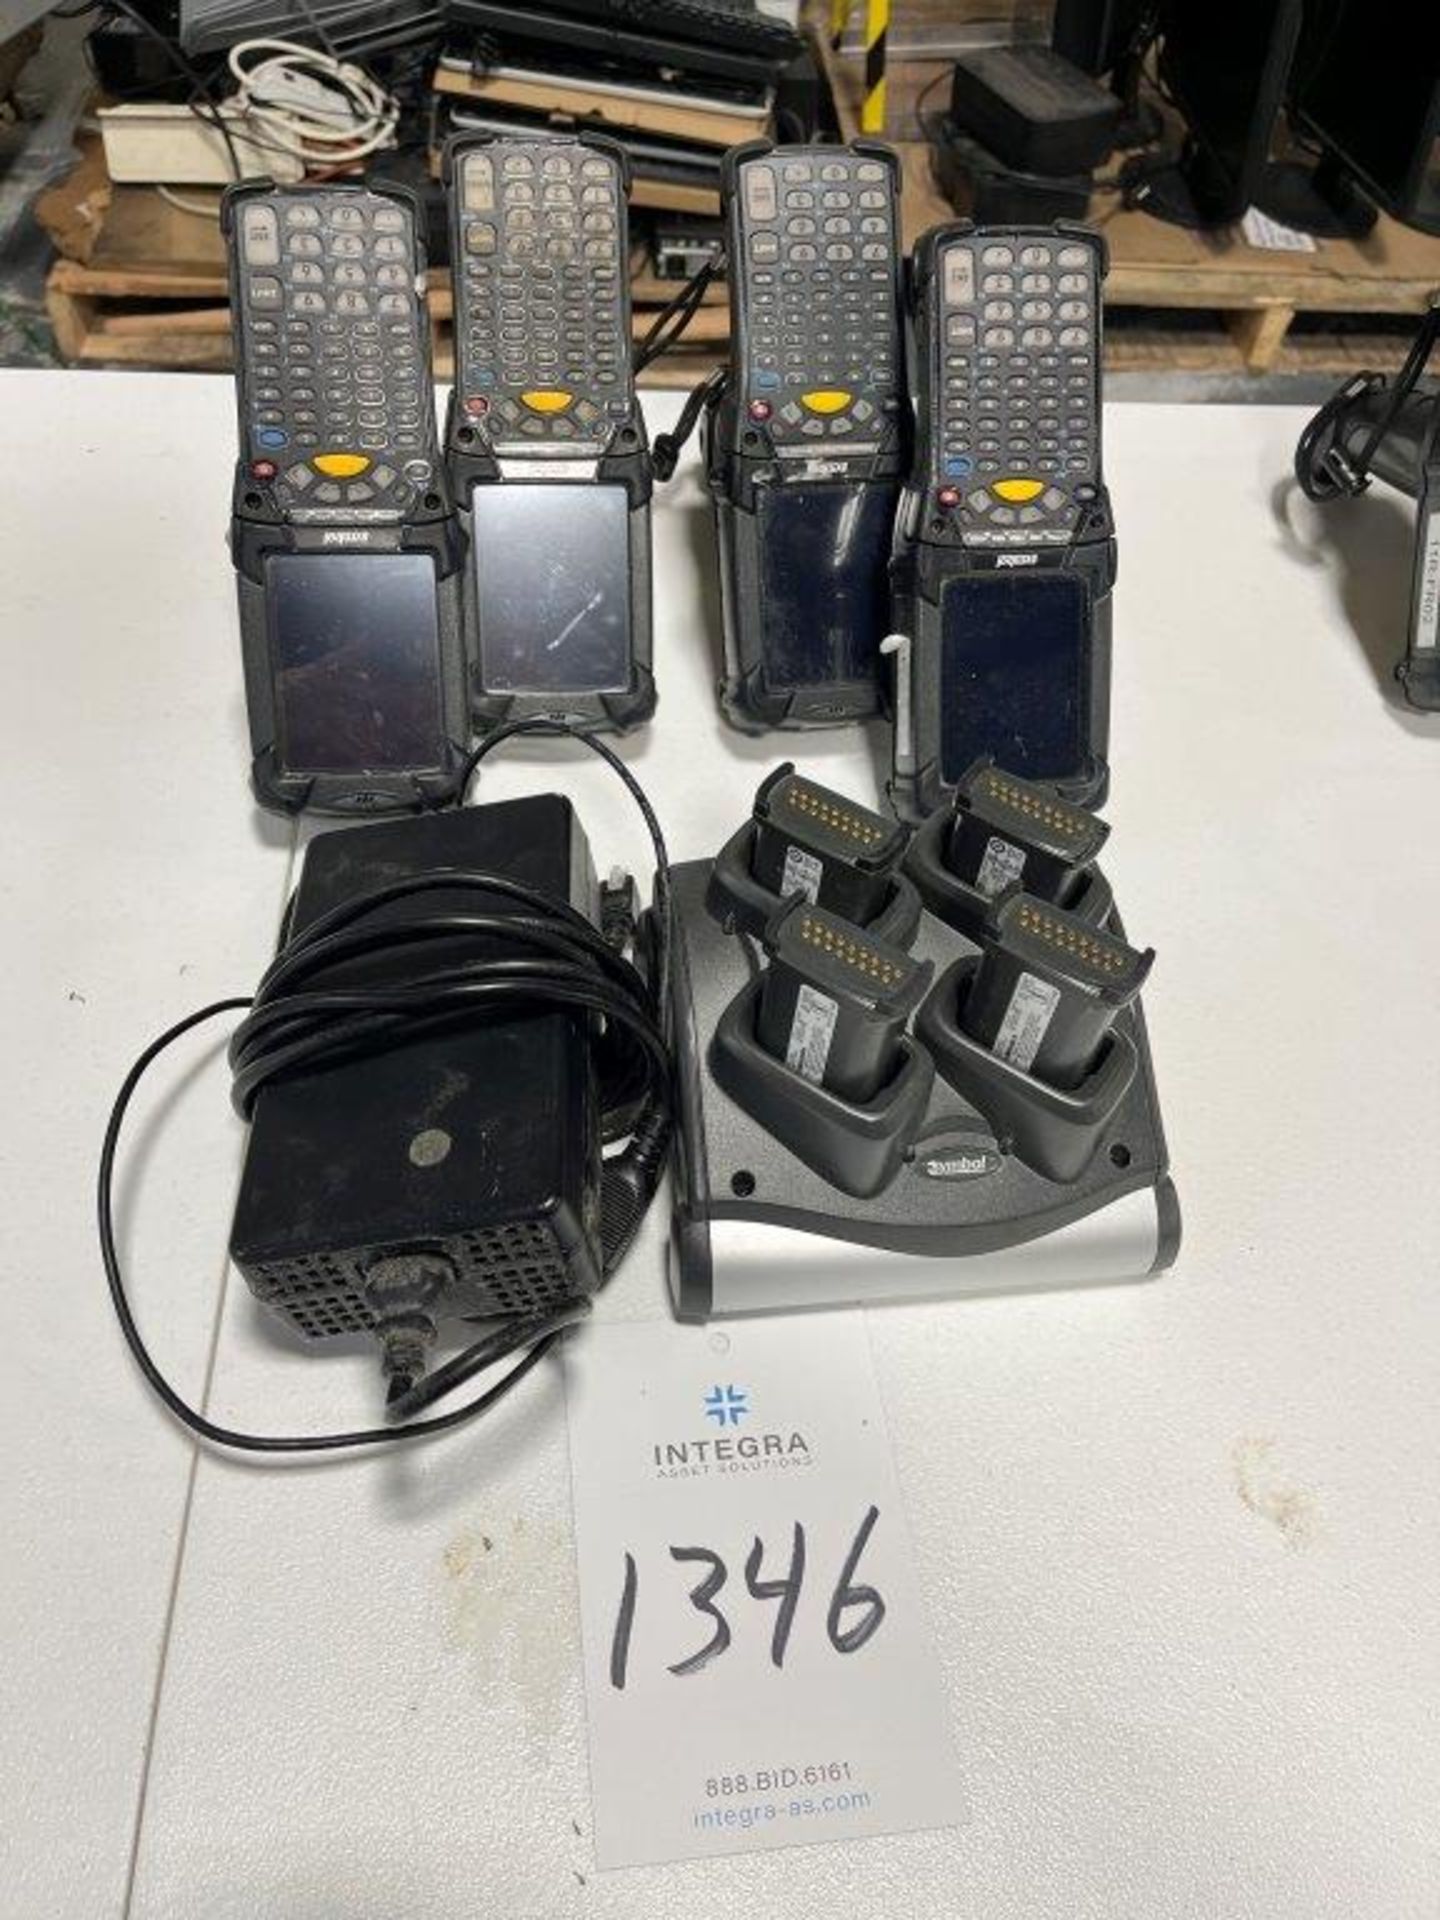 (4) Symbol MC92ND Barcode Scanners, with Spare Batteries and Chargers